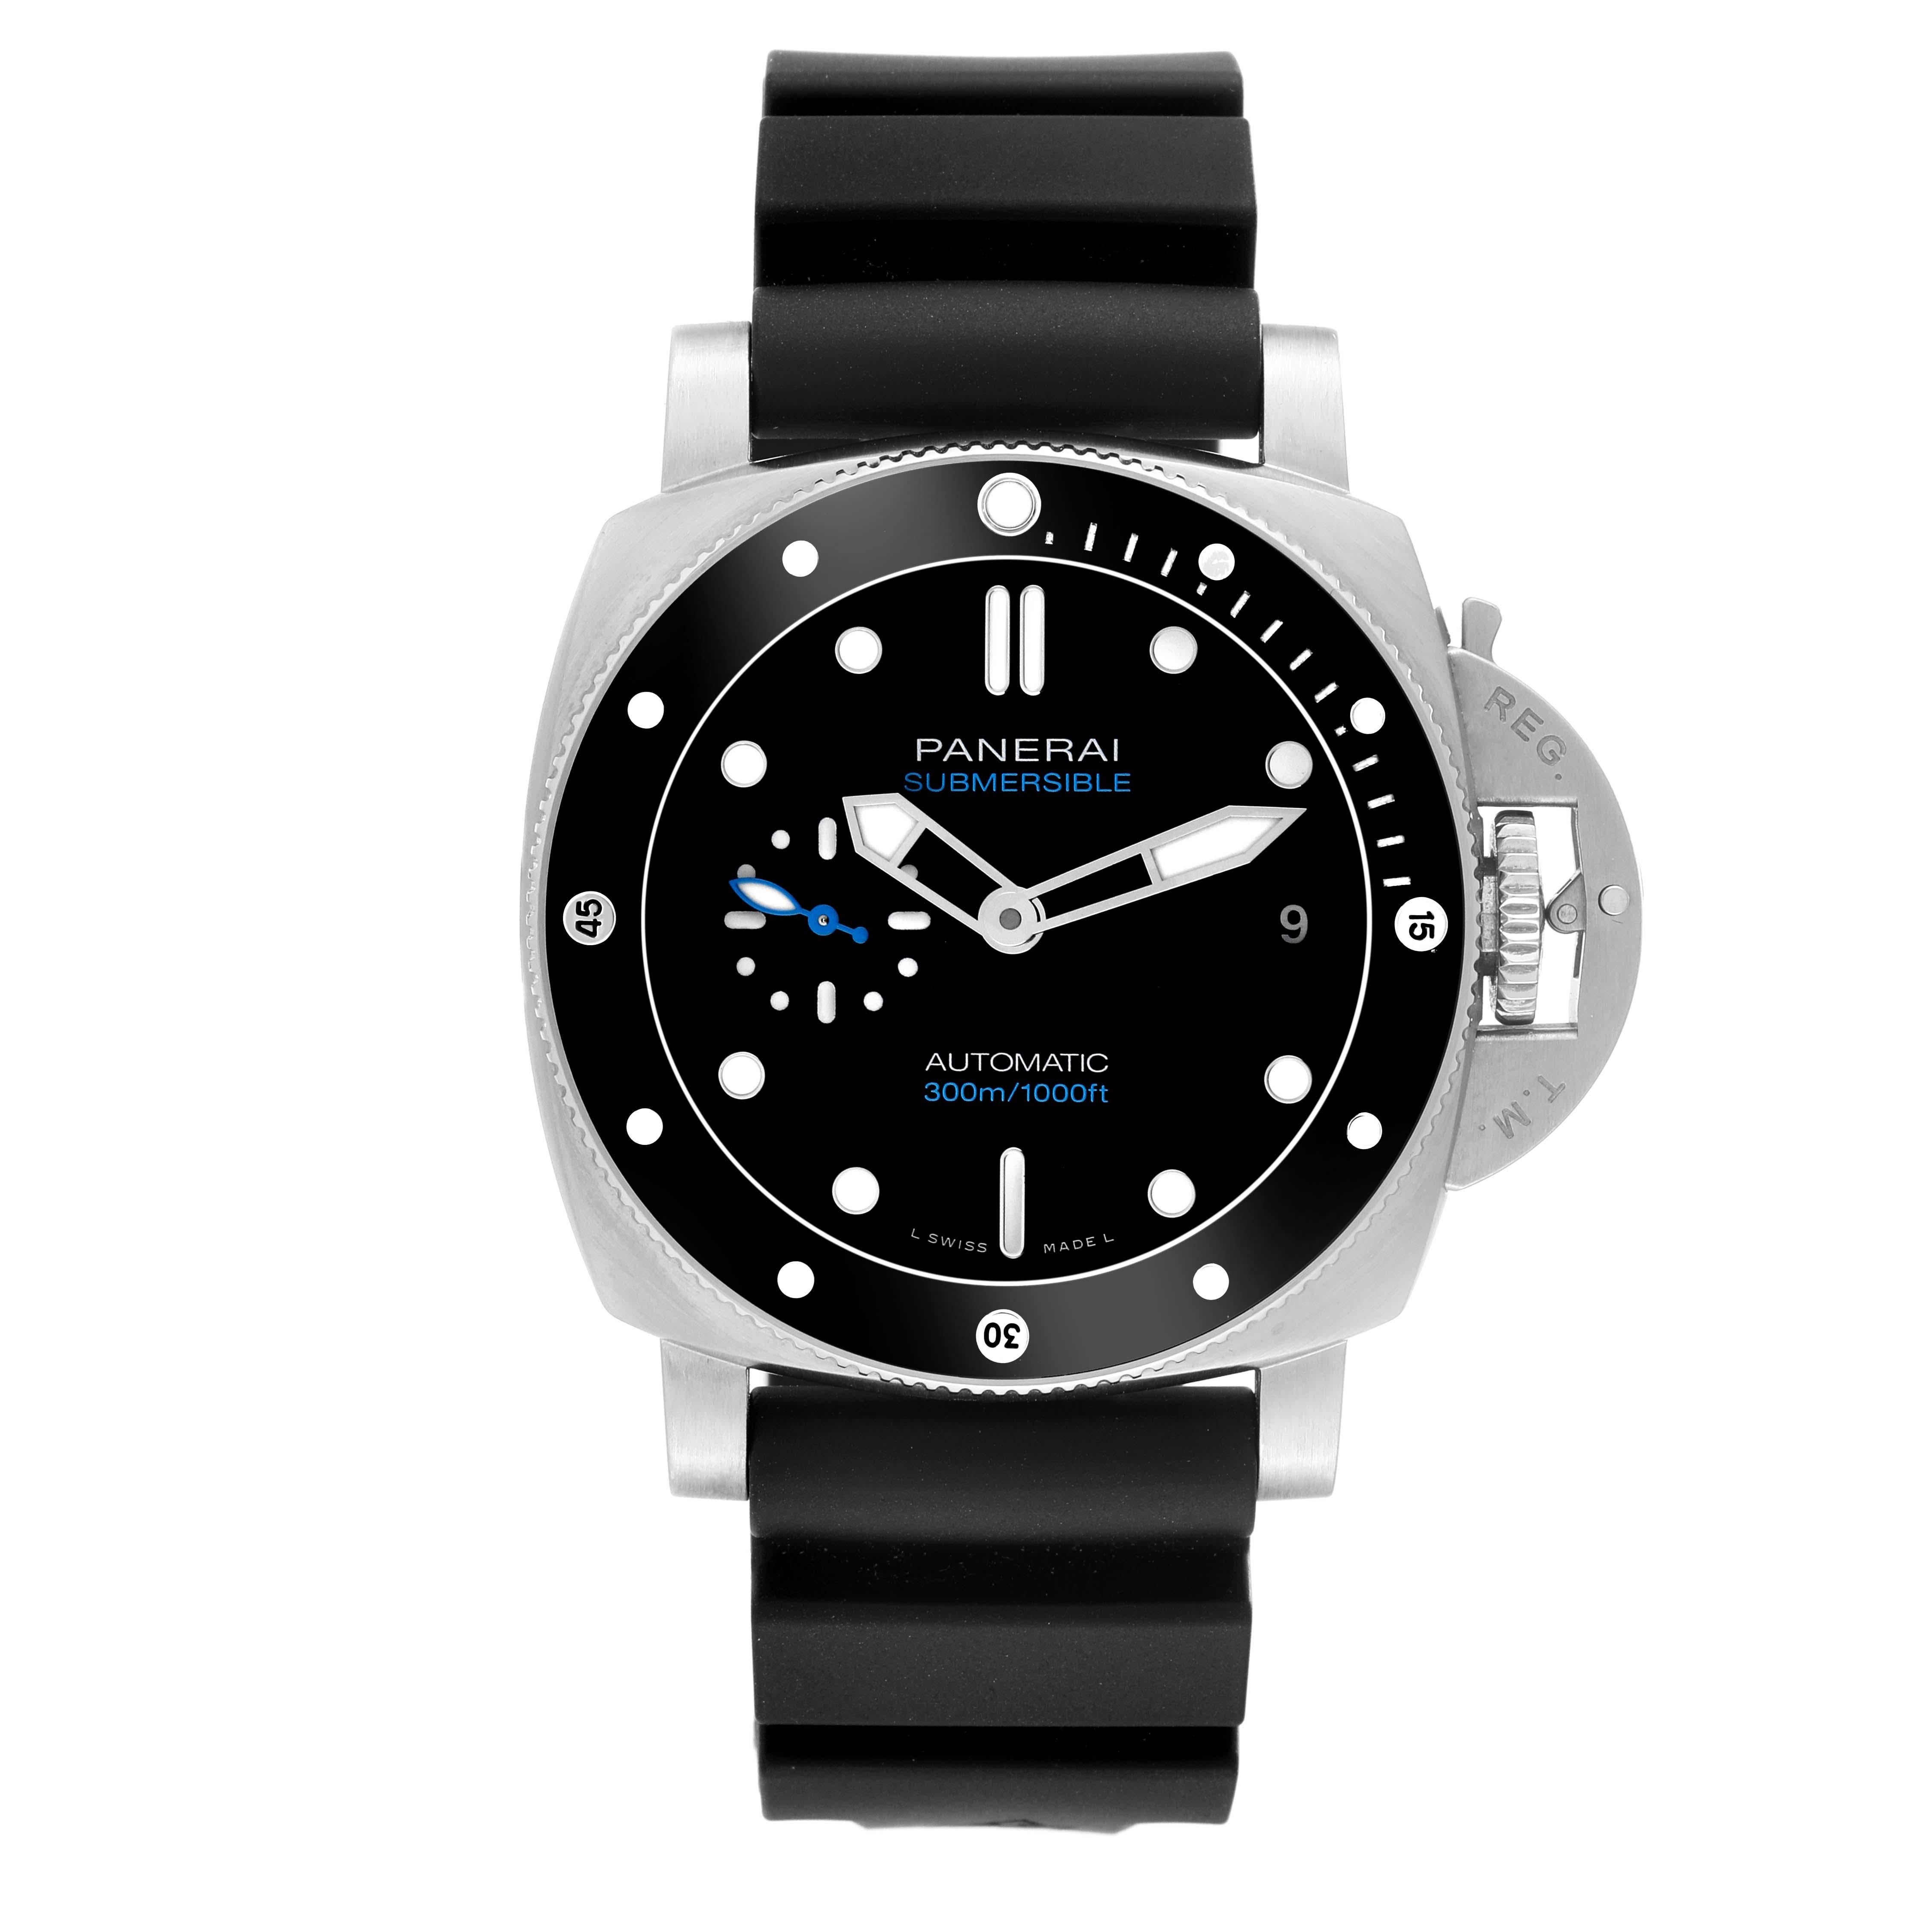 Panerai Luminor Submersible 42mm Steel Mens Watch PAM00683 Box Papers. Automatic self-winding movement. Two part cushion shaped stainless steel case 42.0 mm in diameter. Panerai patented crown protector. Steel with ceramic unidrectional rotating